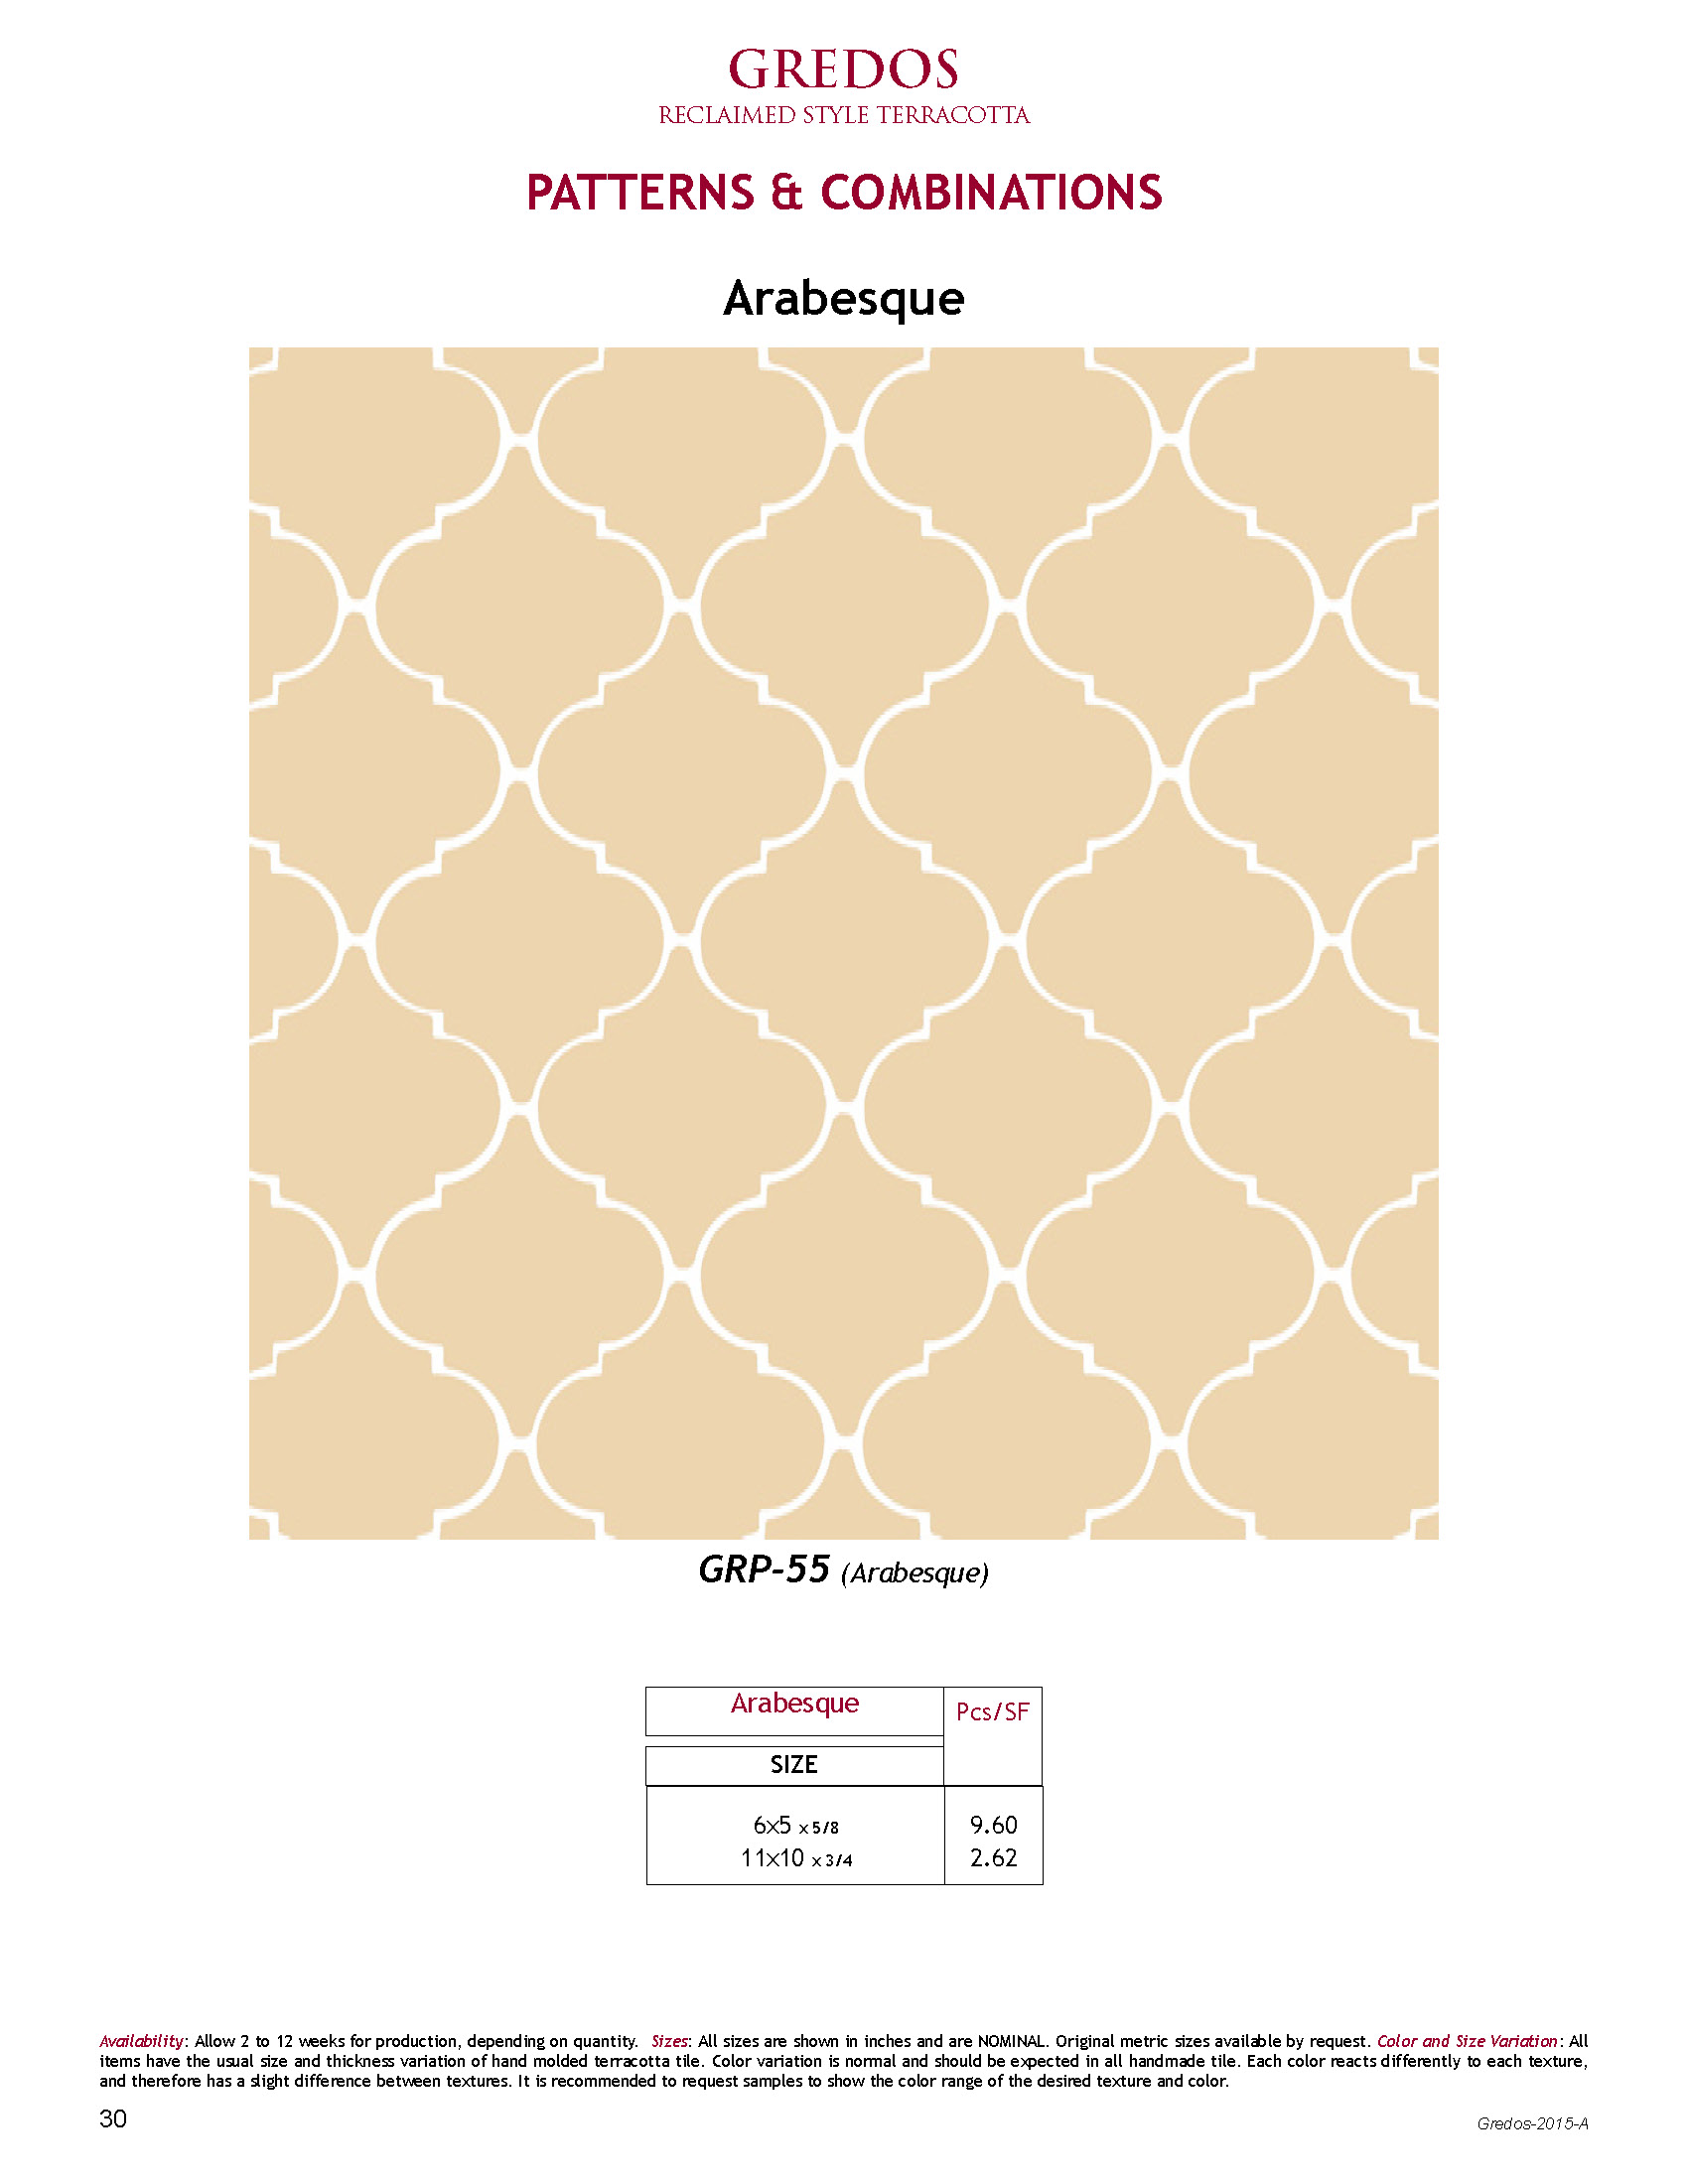 2-Gredos-Patterns&Combinations2015-A_Page_30.jpg